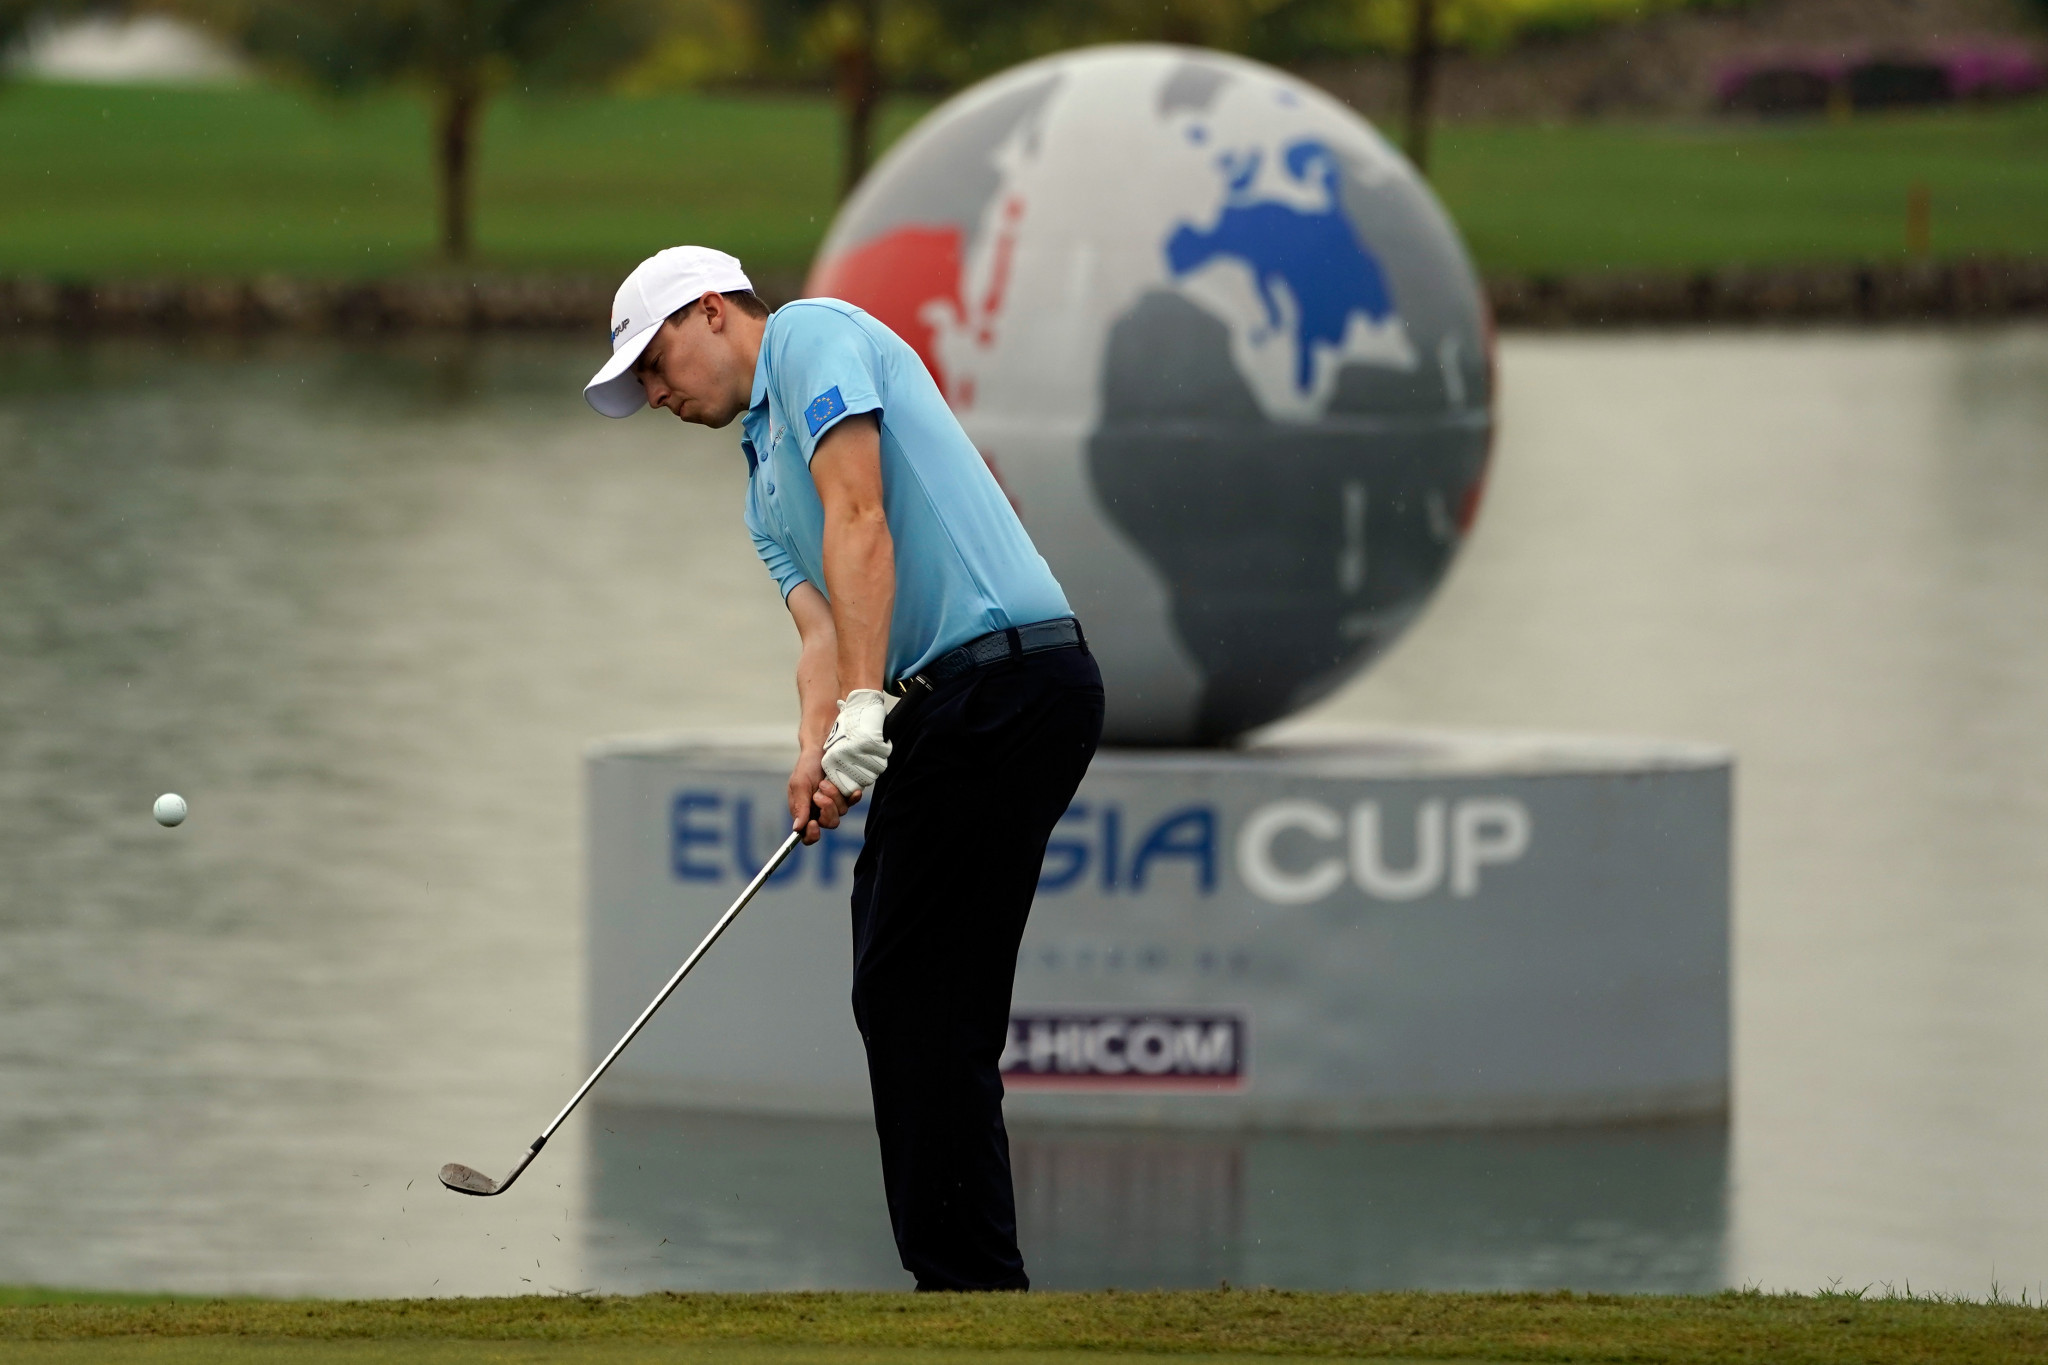 Bjørn insists Europe can overturn Asia's slim lead to lift 2018 EurAsia Cup